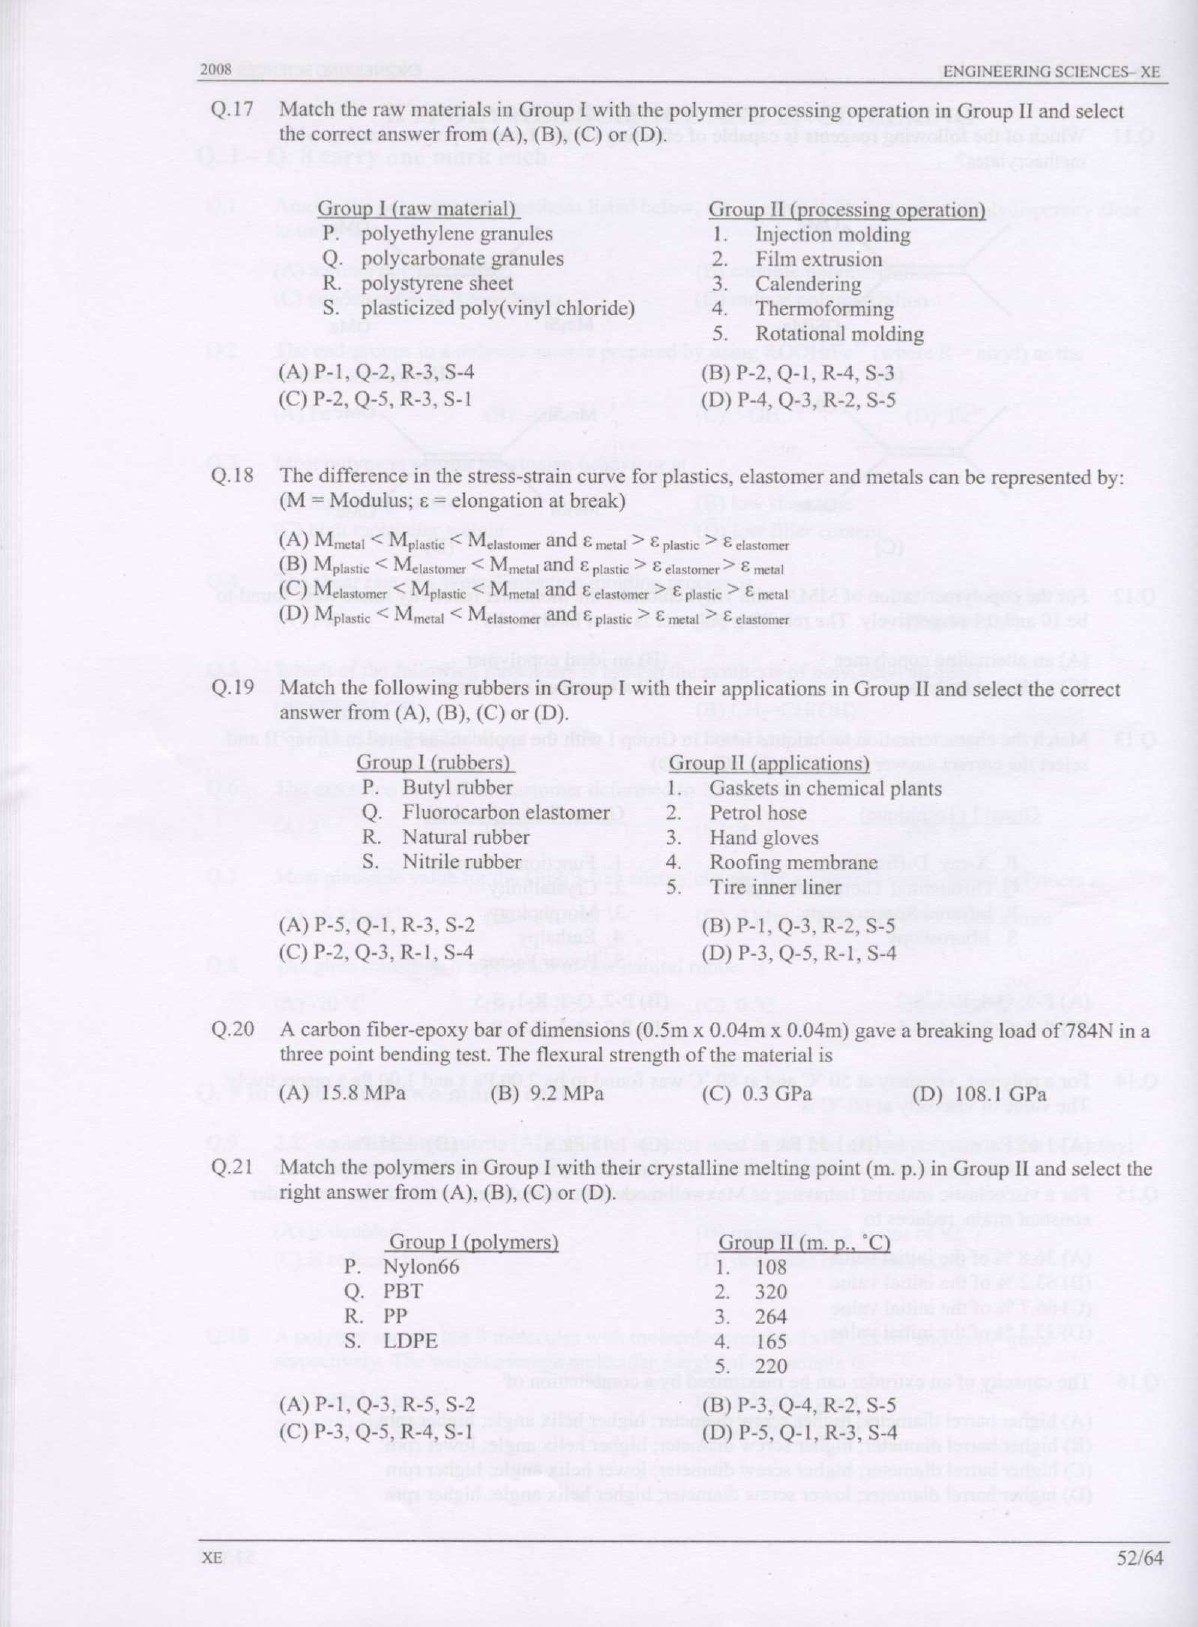 GATE Exam Question Paper 2008 Engineering Sciences 52